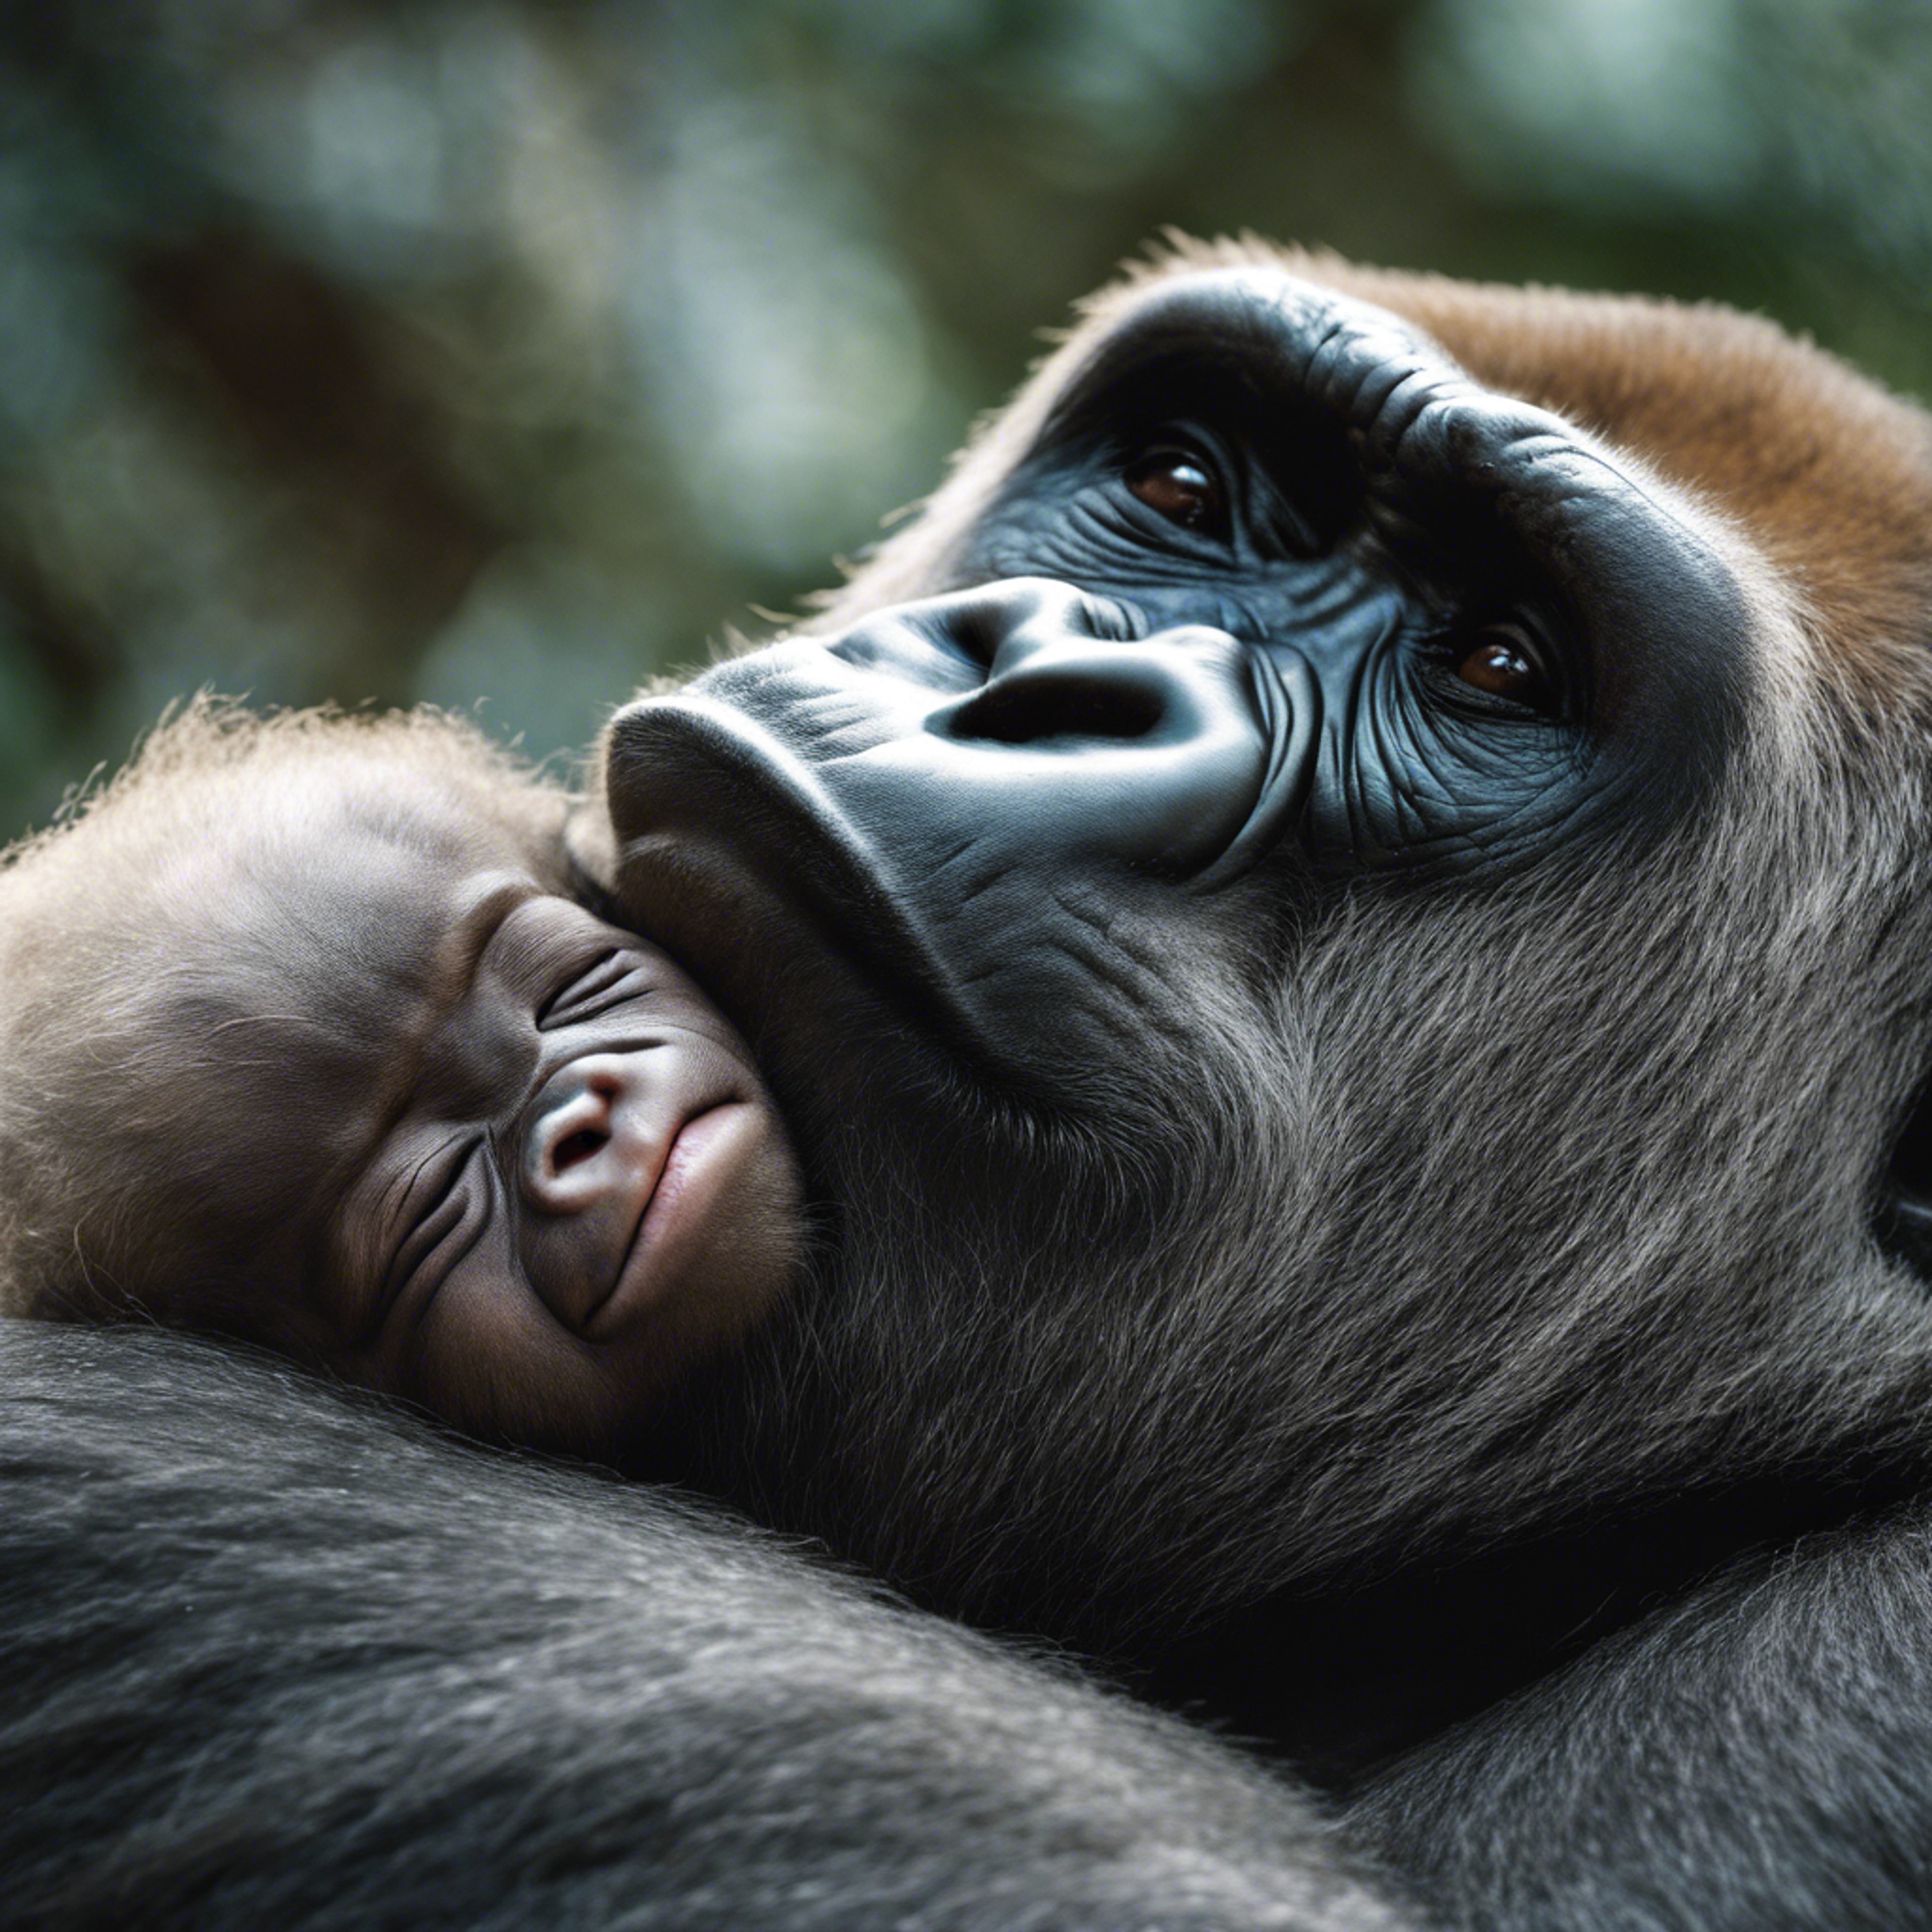 A close-up, emotional study of a gorilla mother's face as she cradles her sleeping newborn. 牆紙[516e0f2ed6254482ad03]